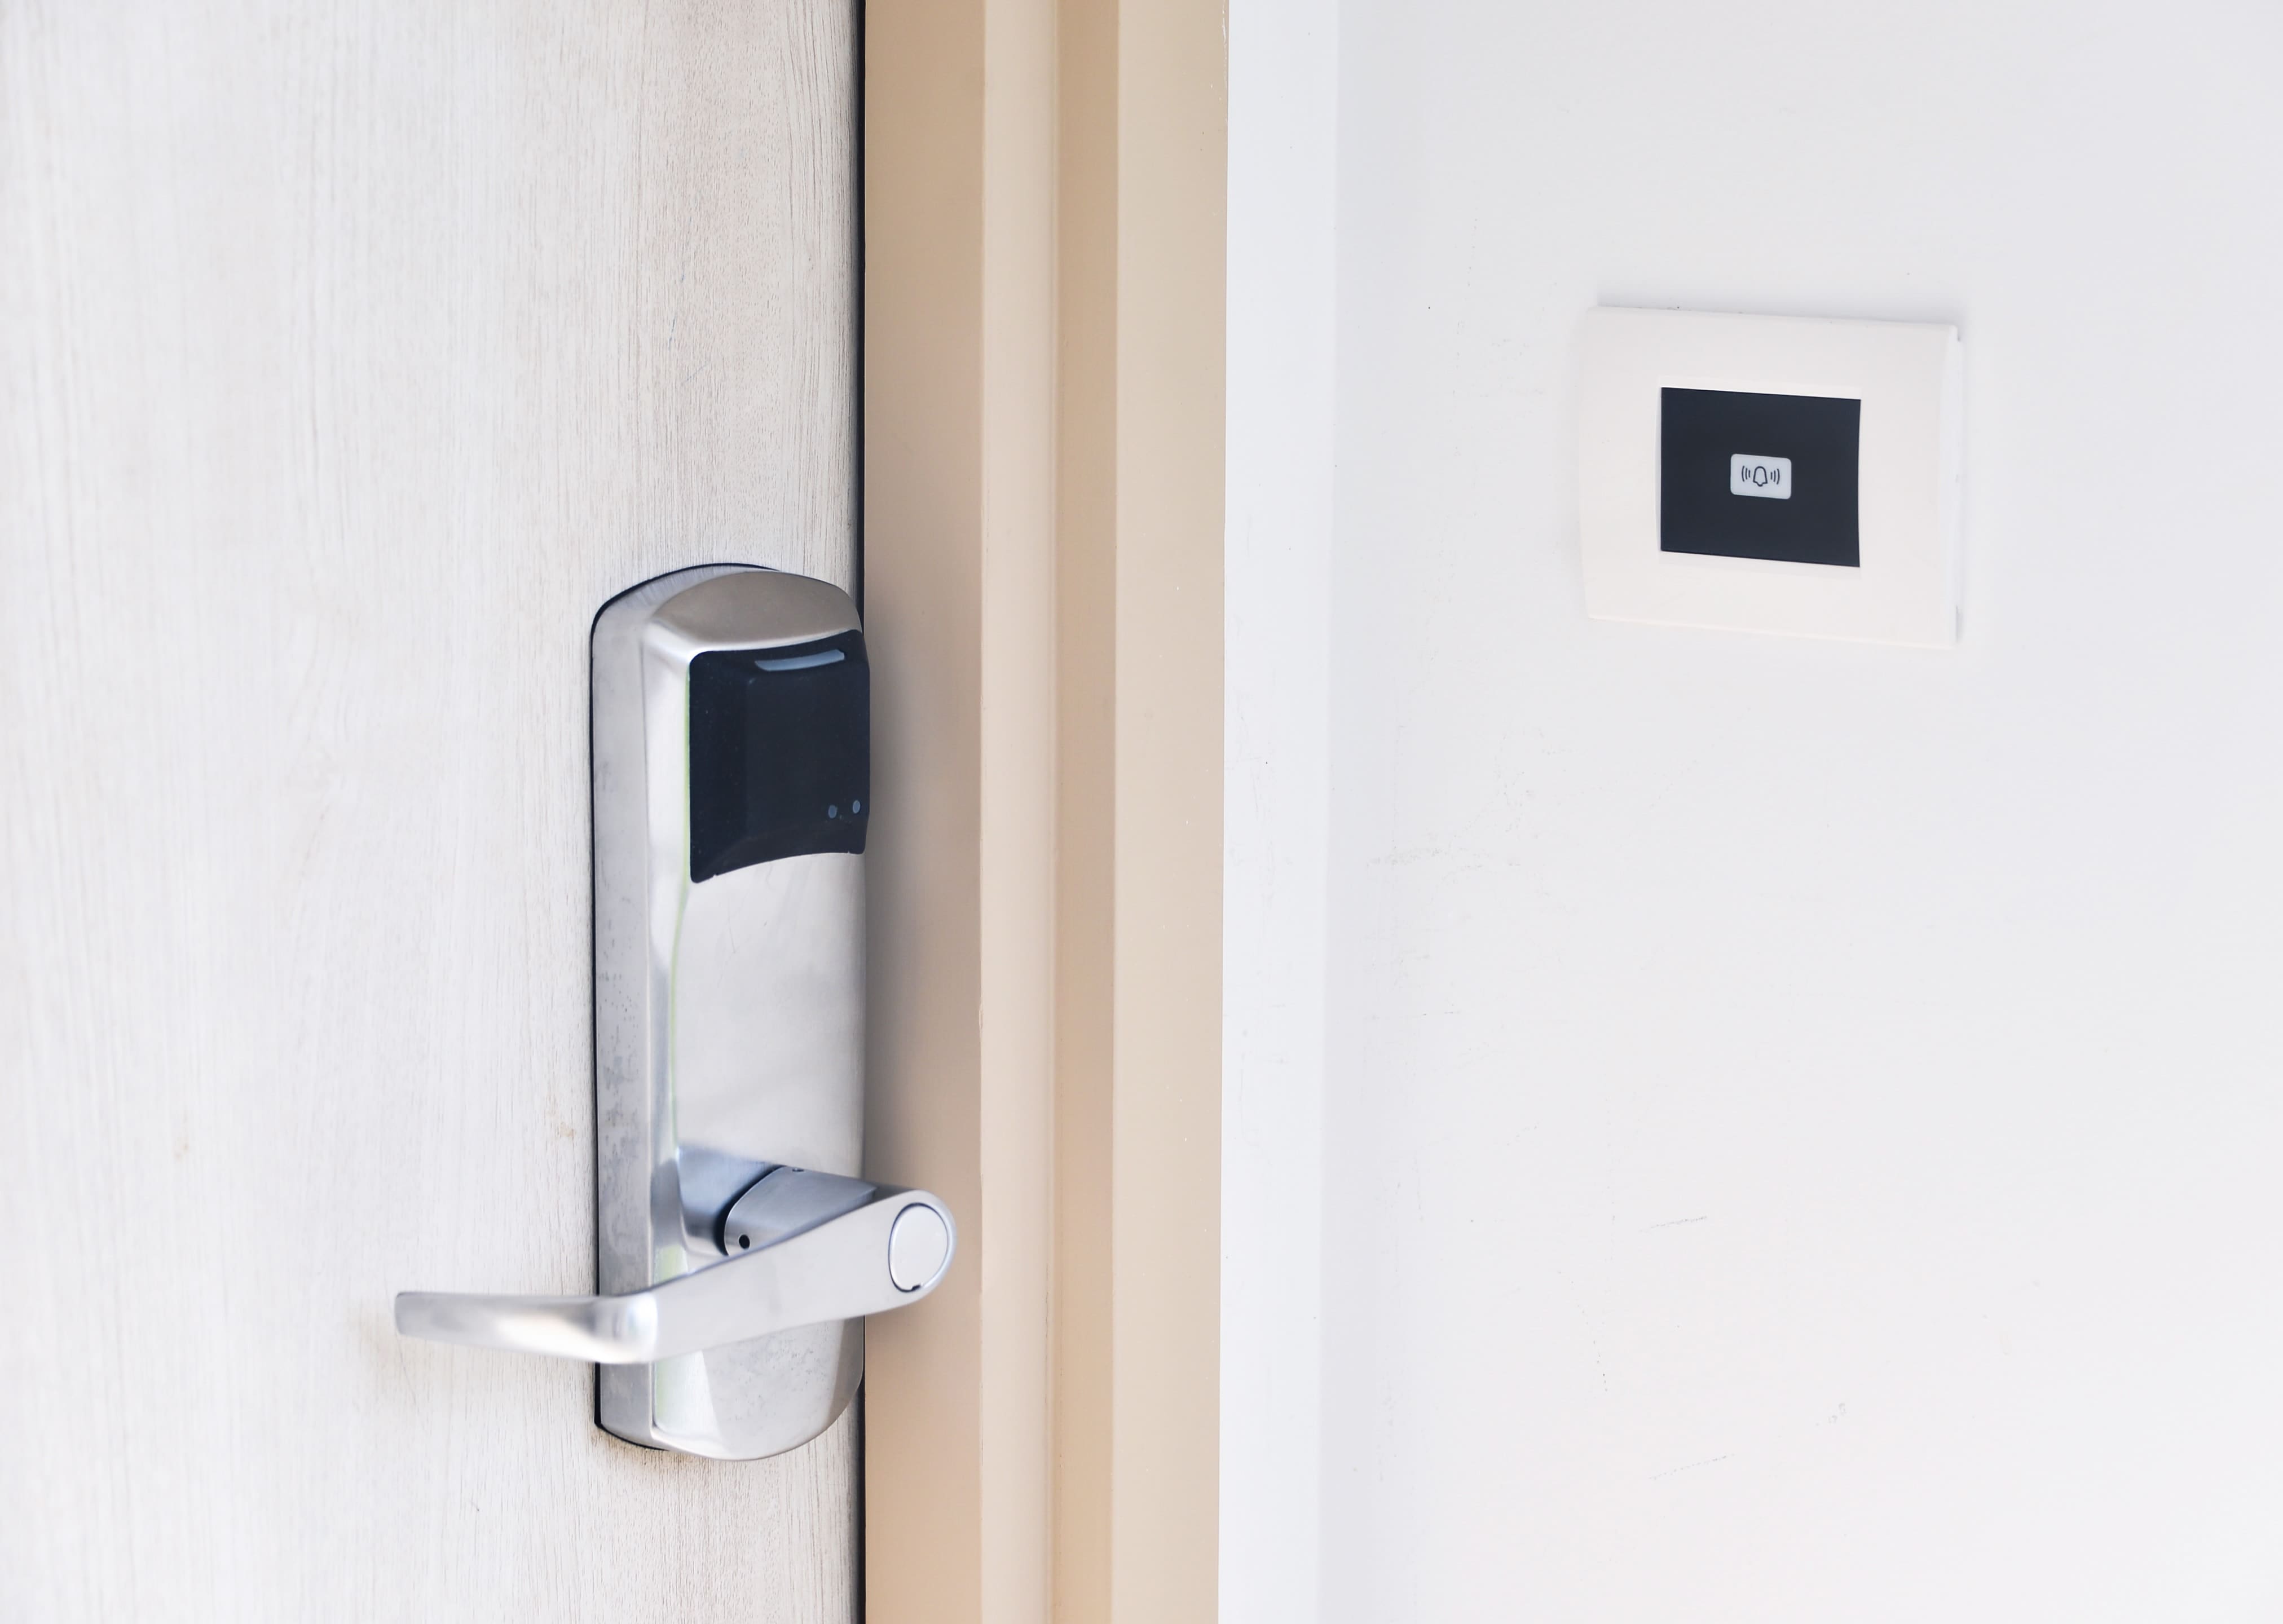 Featured image for “Electronic Locks: Should You Use Them For Your Home or Business?”